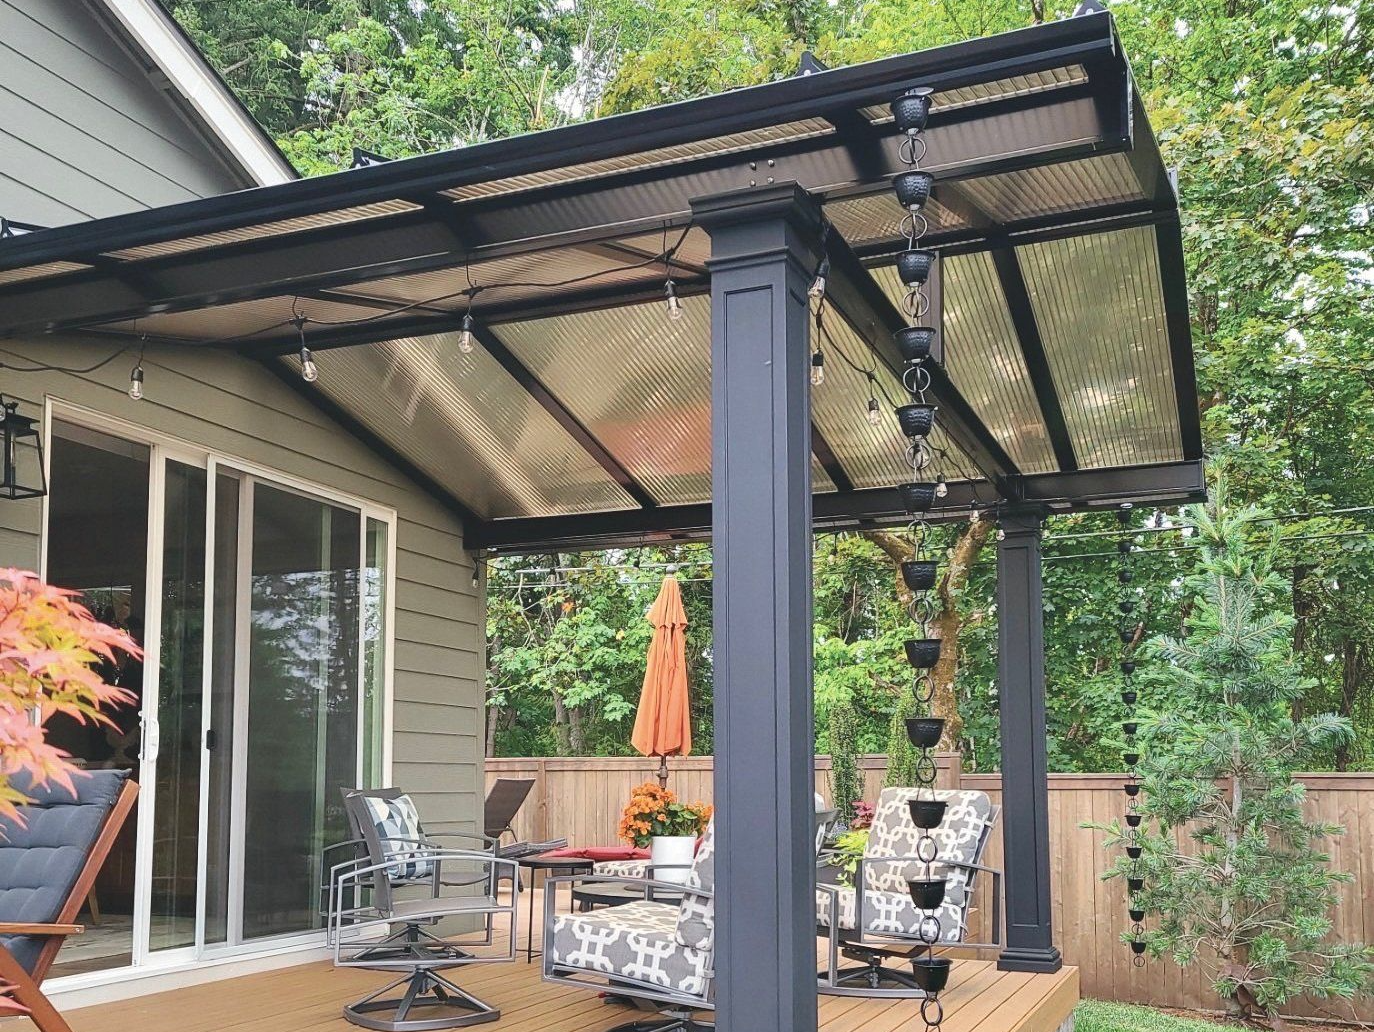 Patio Covers in Clackamas Oregon - Gable Roof with ACRYLITE Acrylic